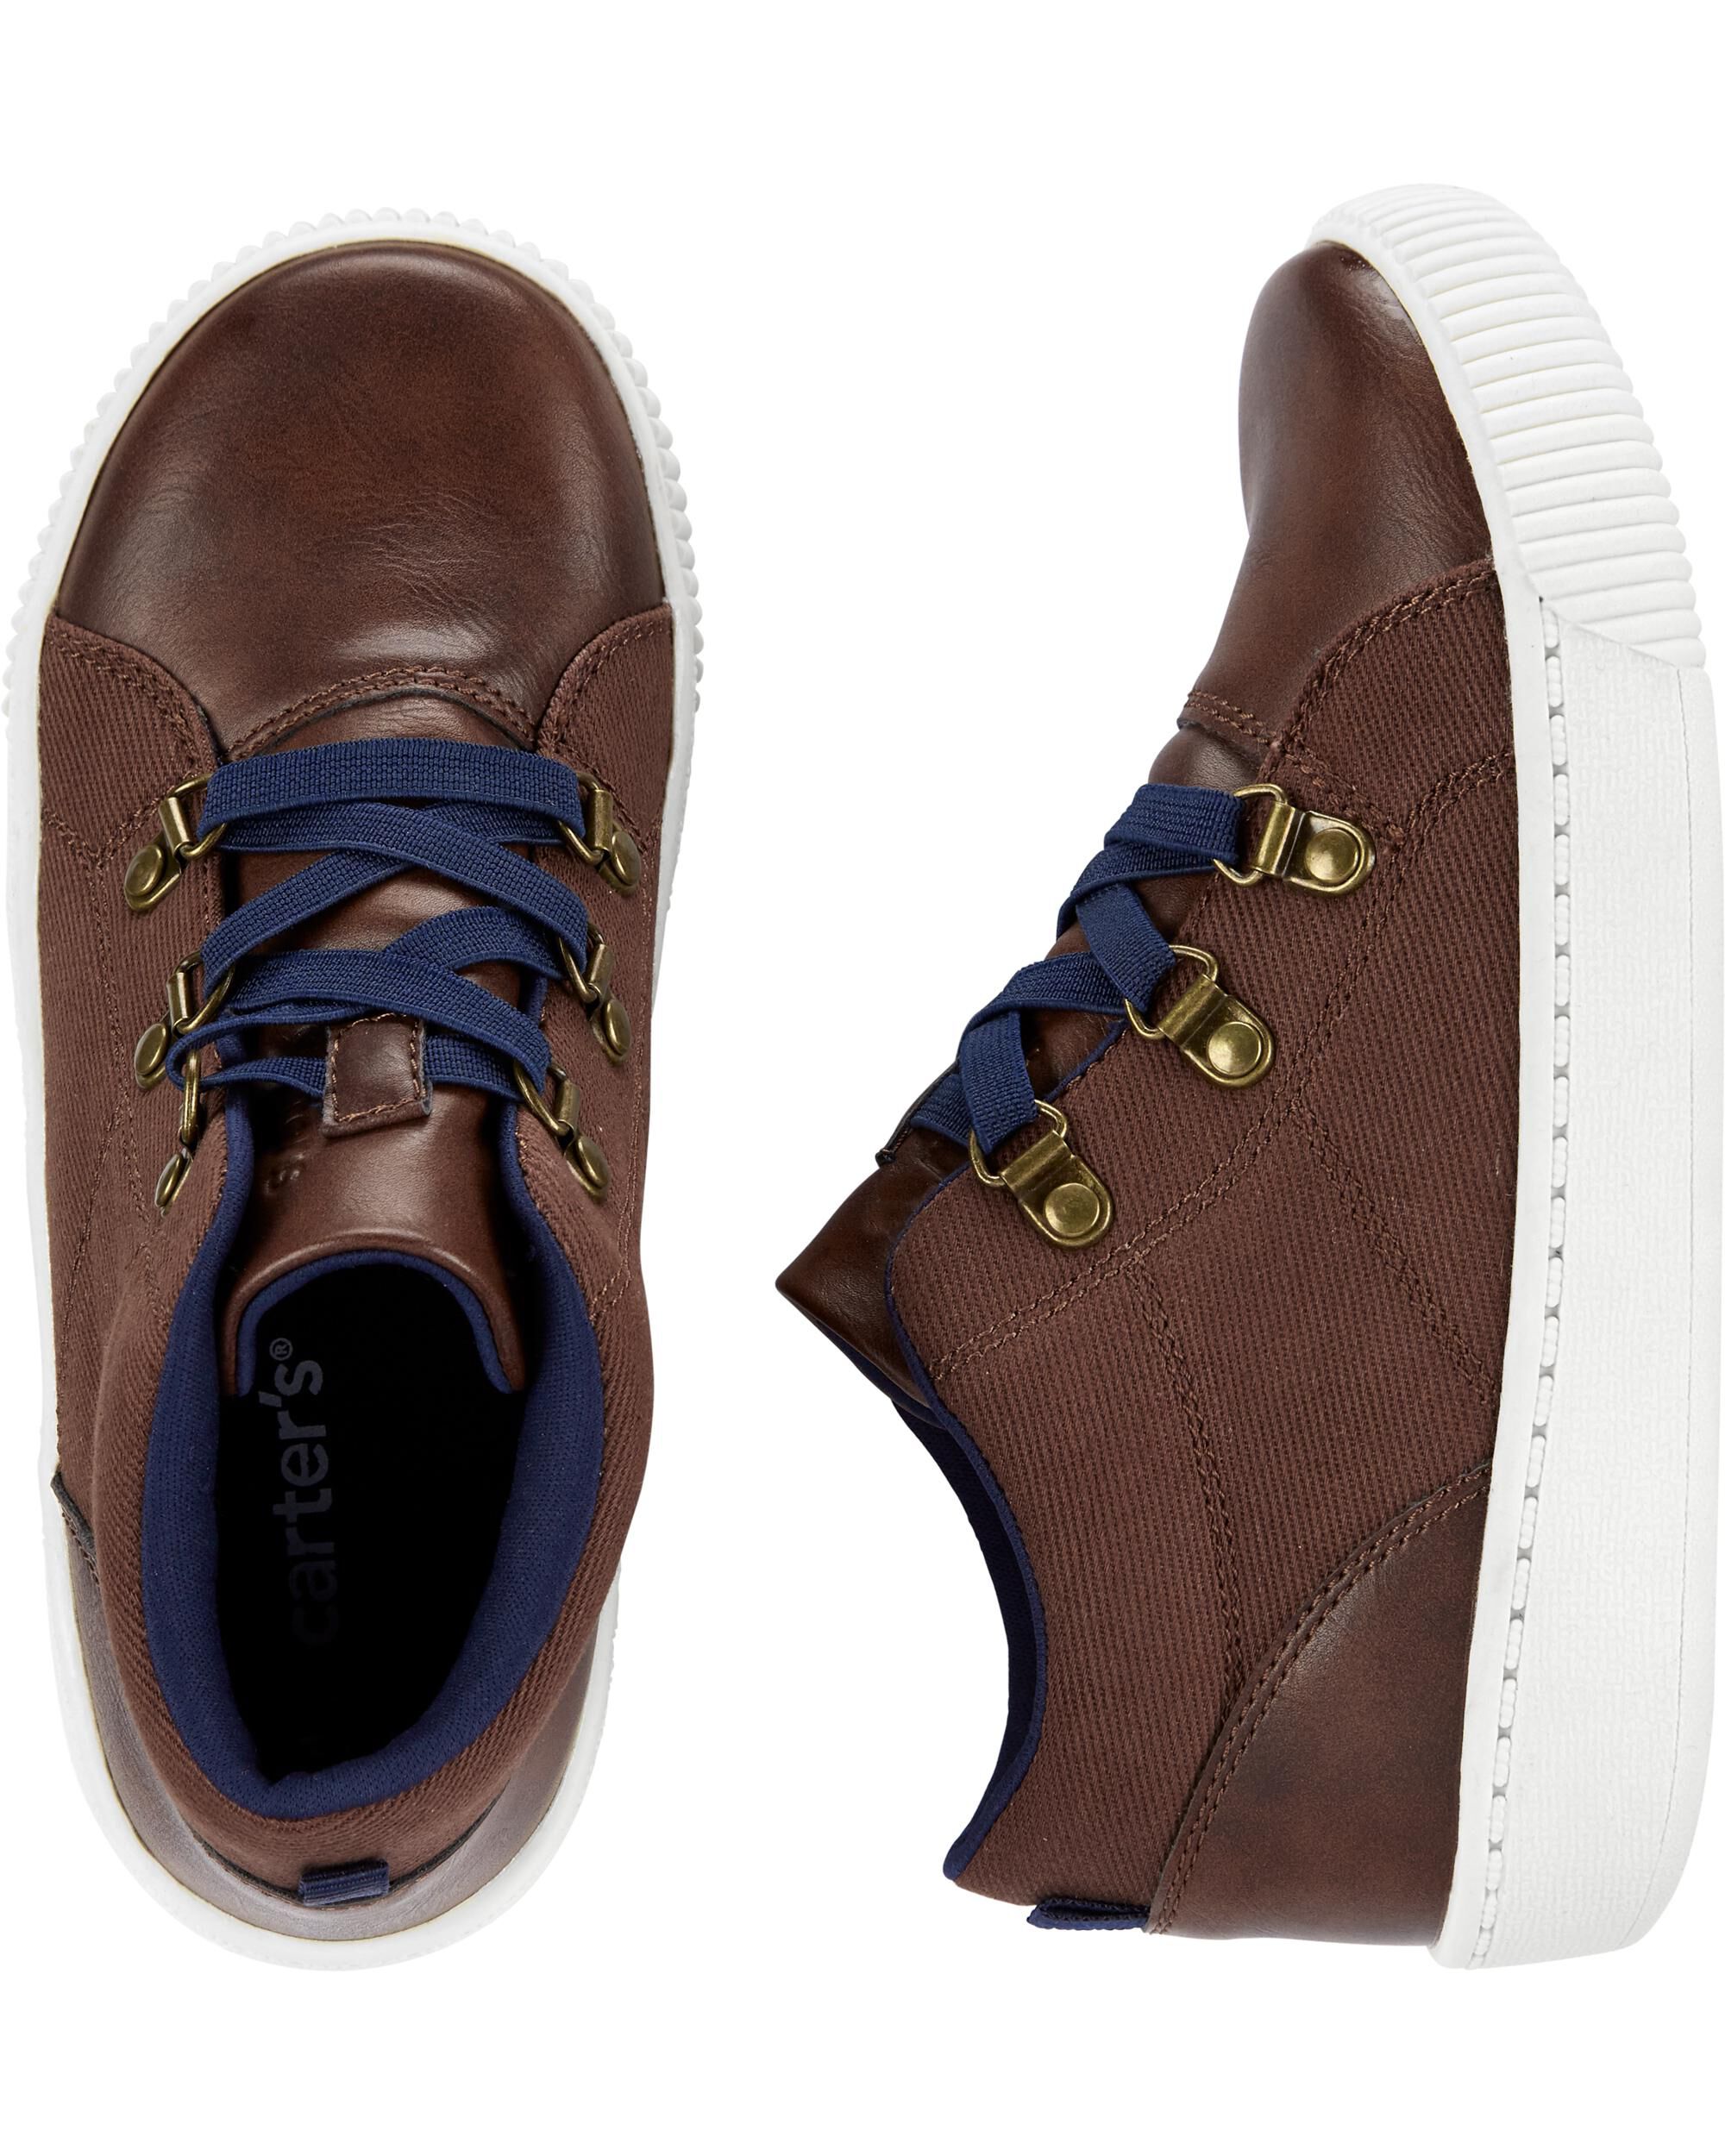 carters oxford shoes